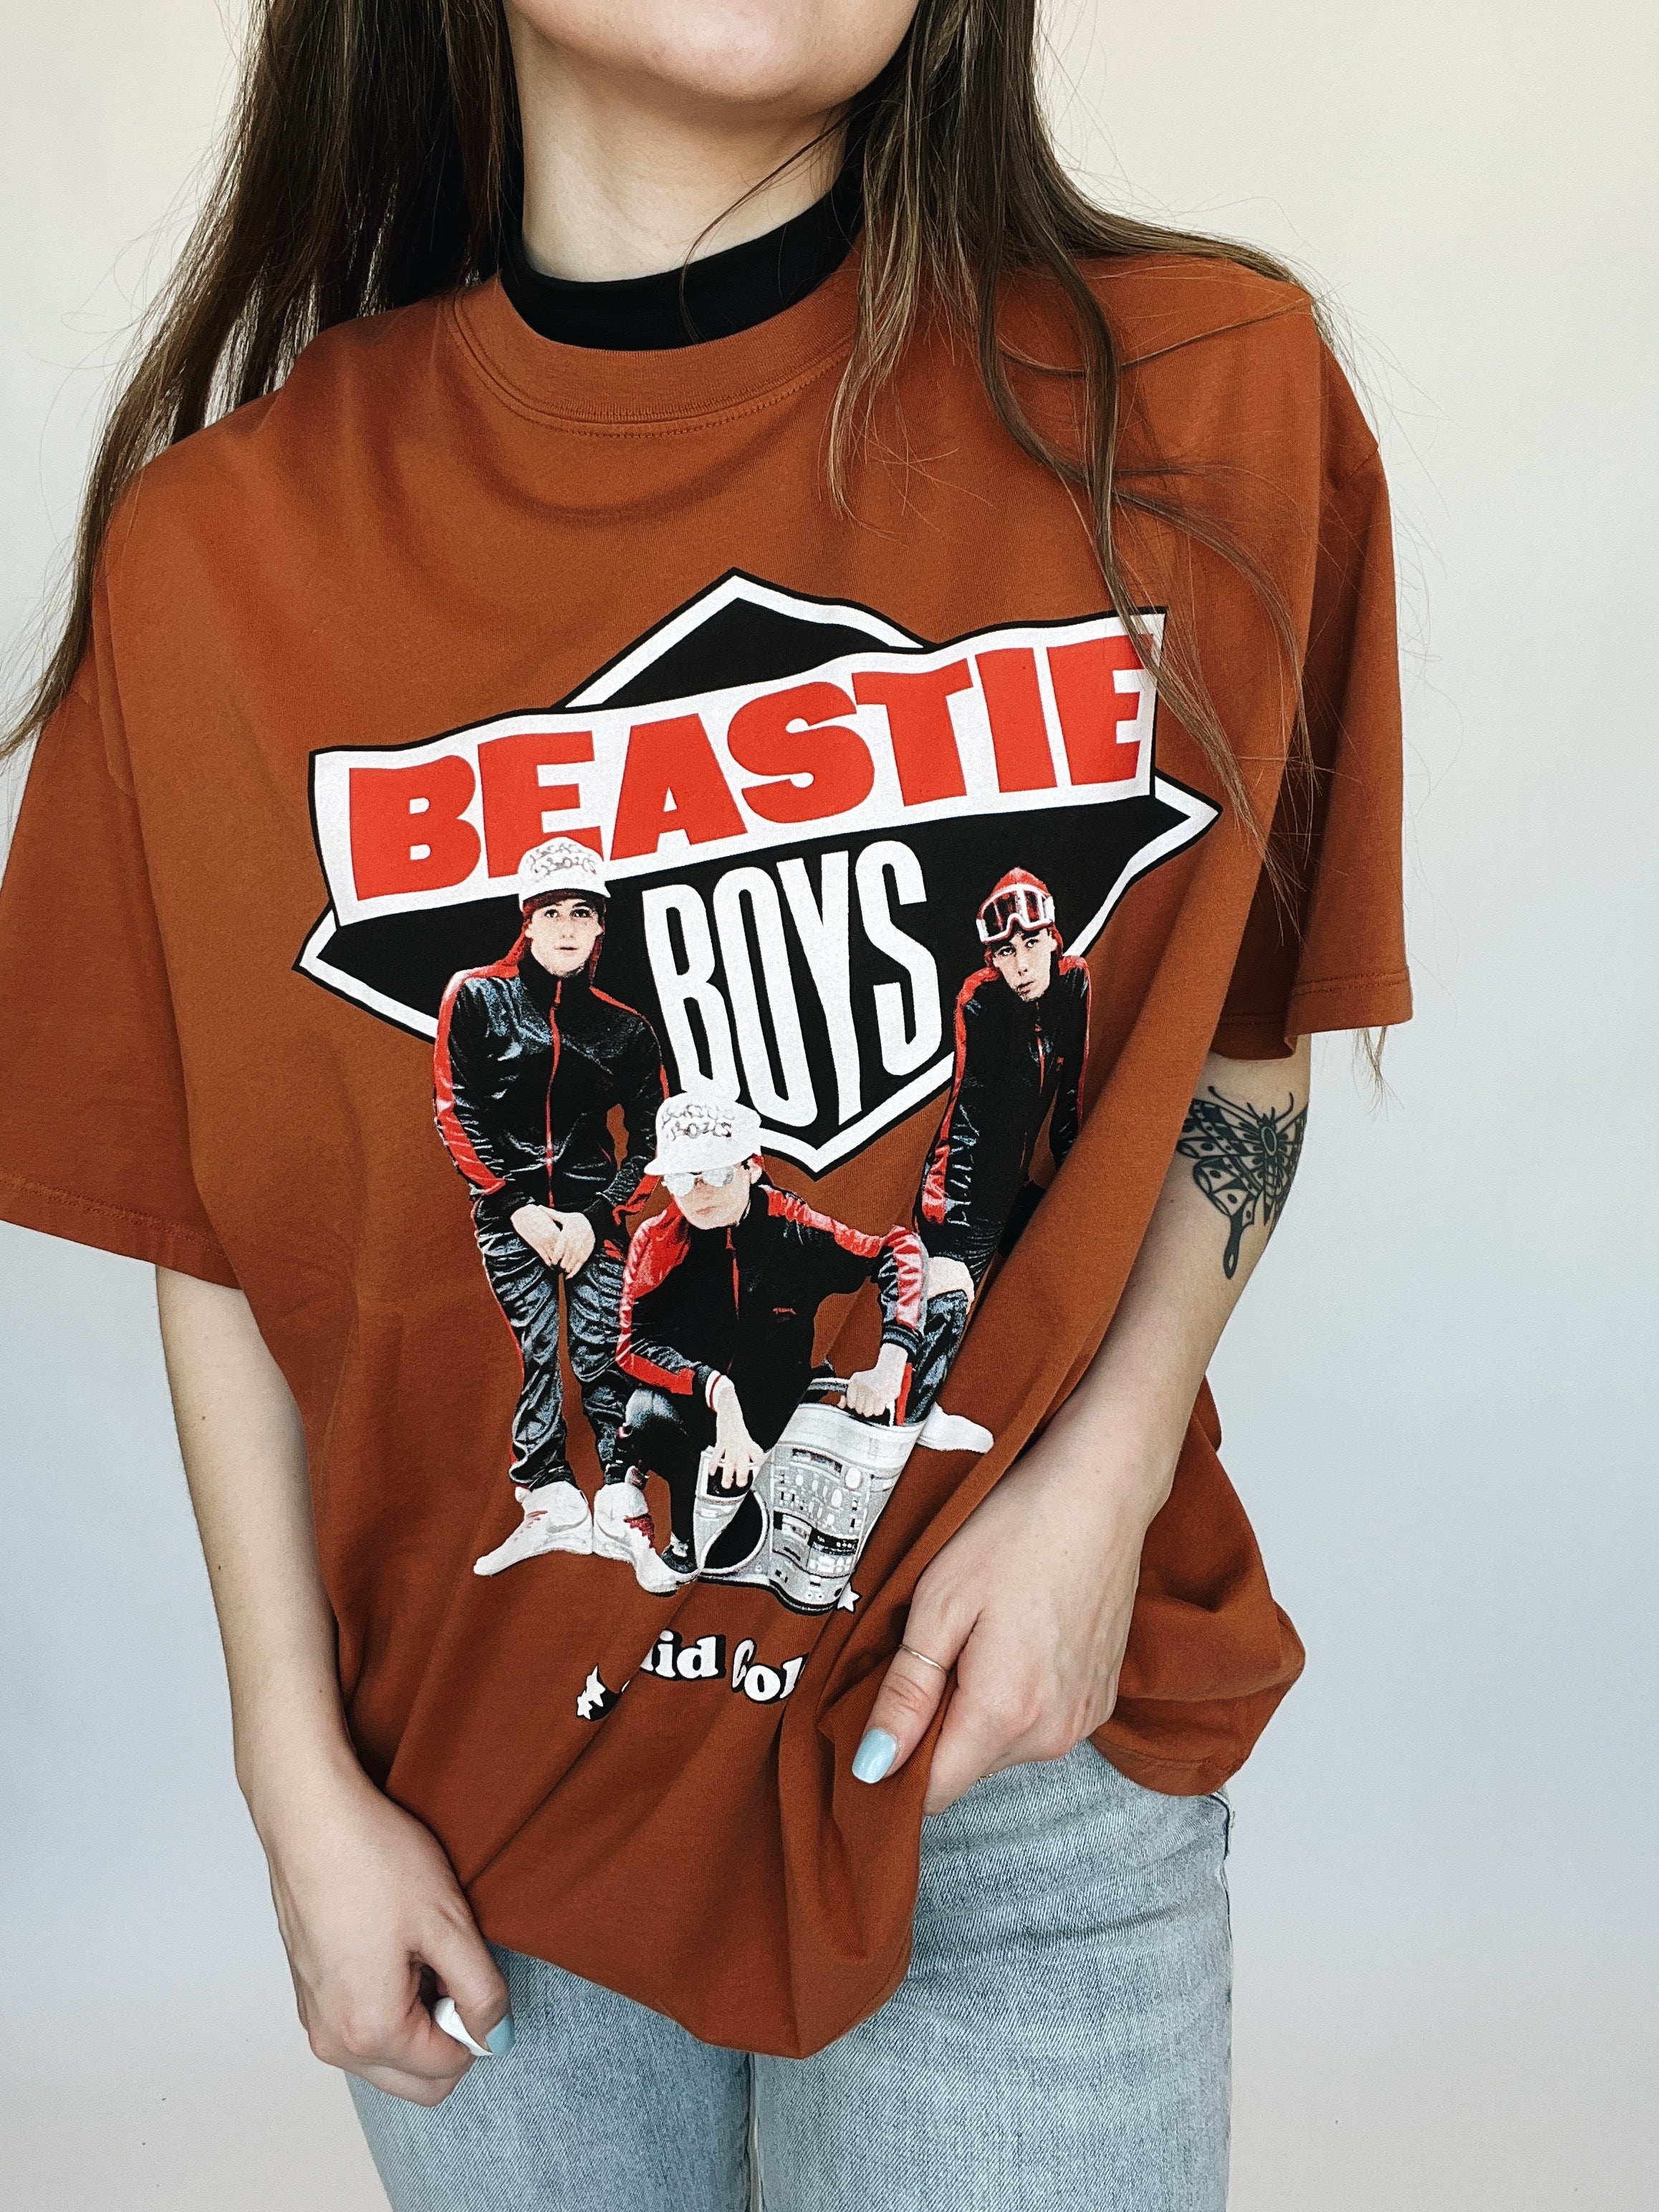 beastie boys solid gold hits tee